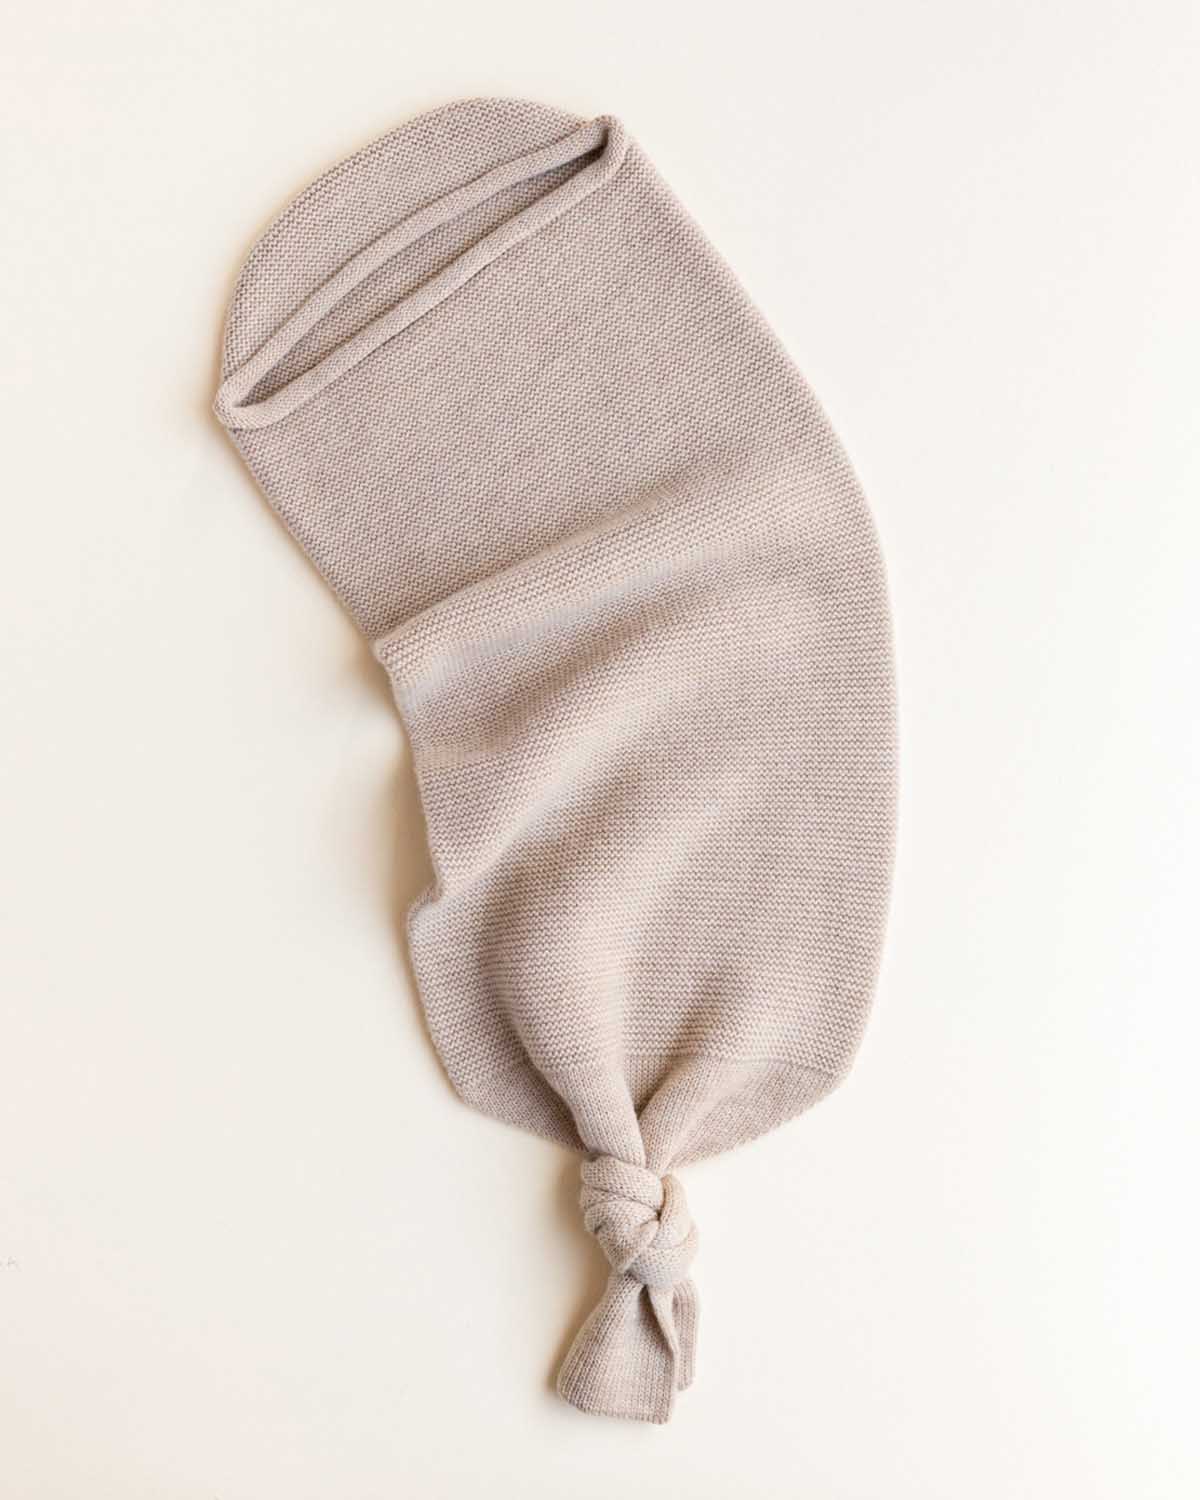 Cocoon swaddle bag - sand